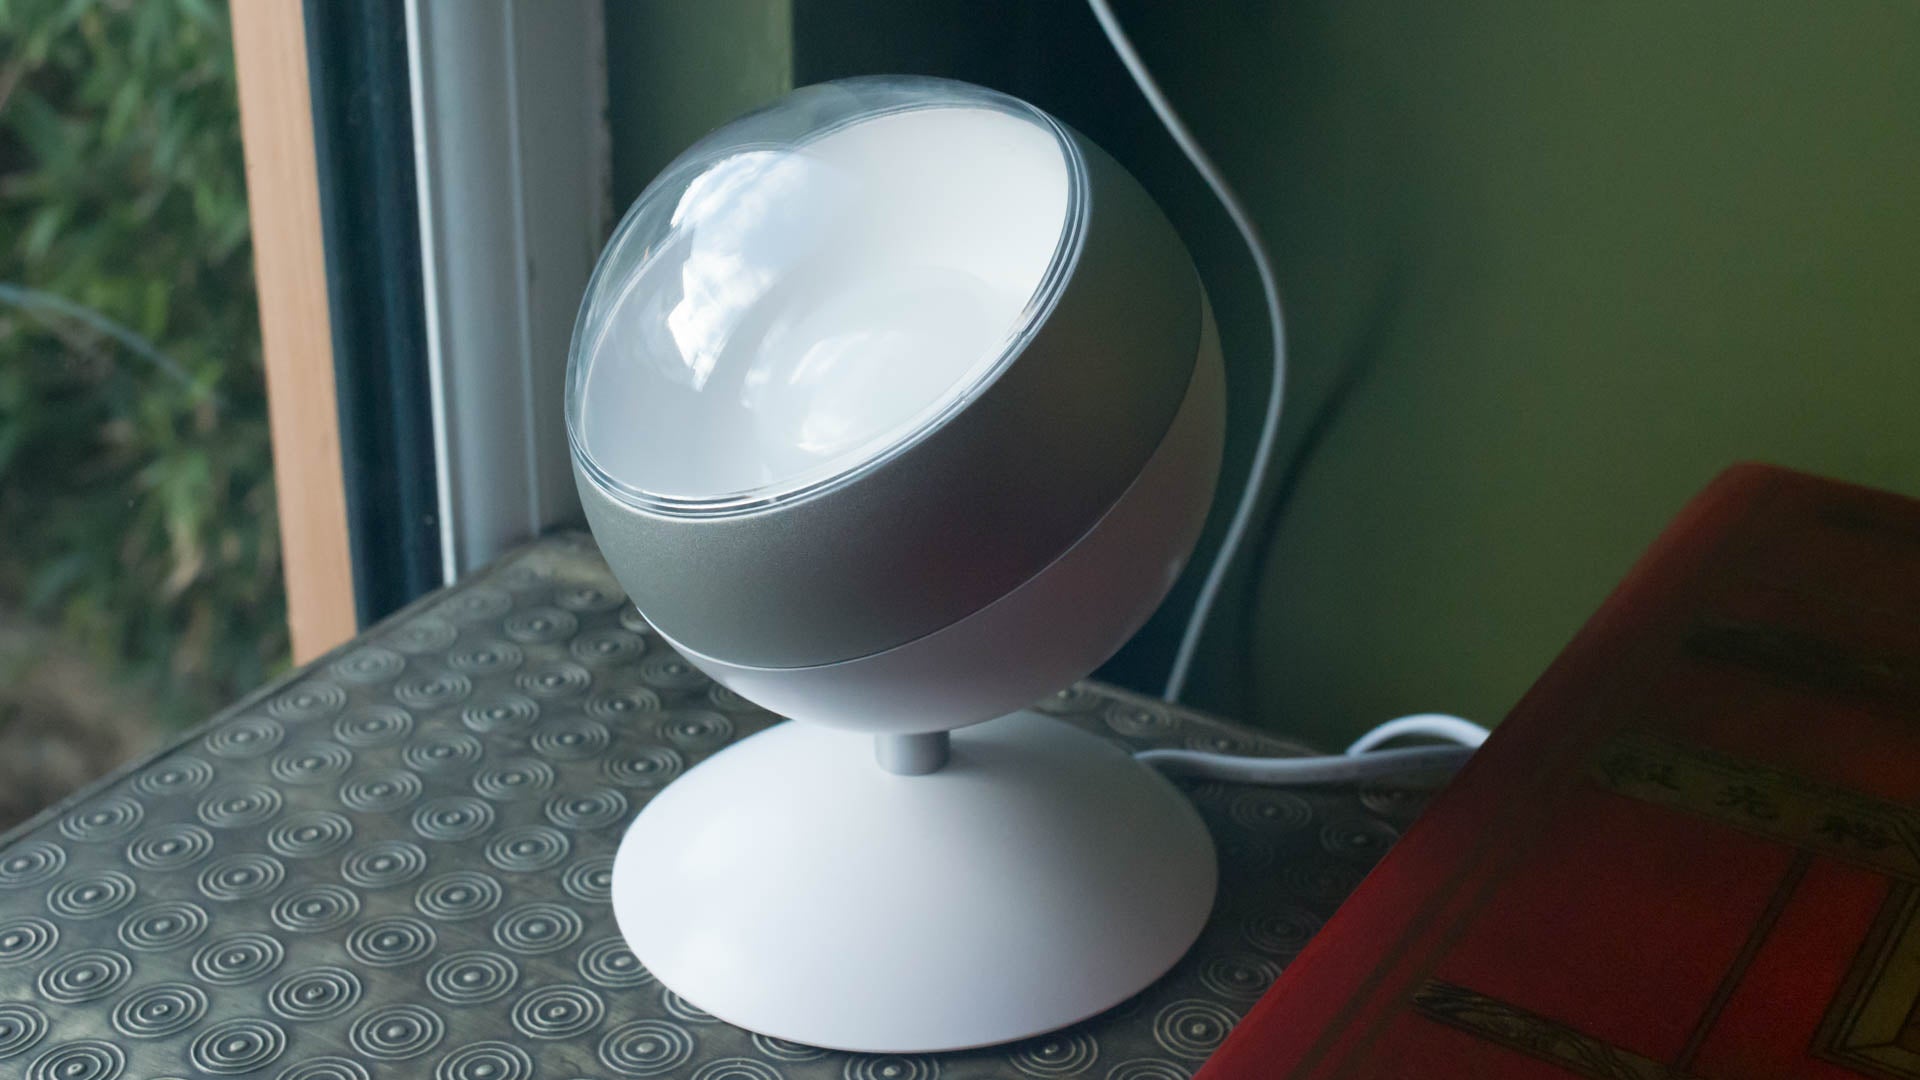 WiZ Connected smart lamp on a patterned tabletop.